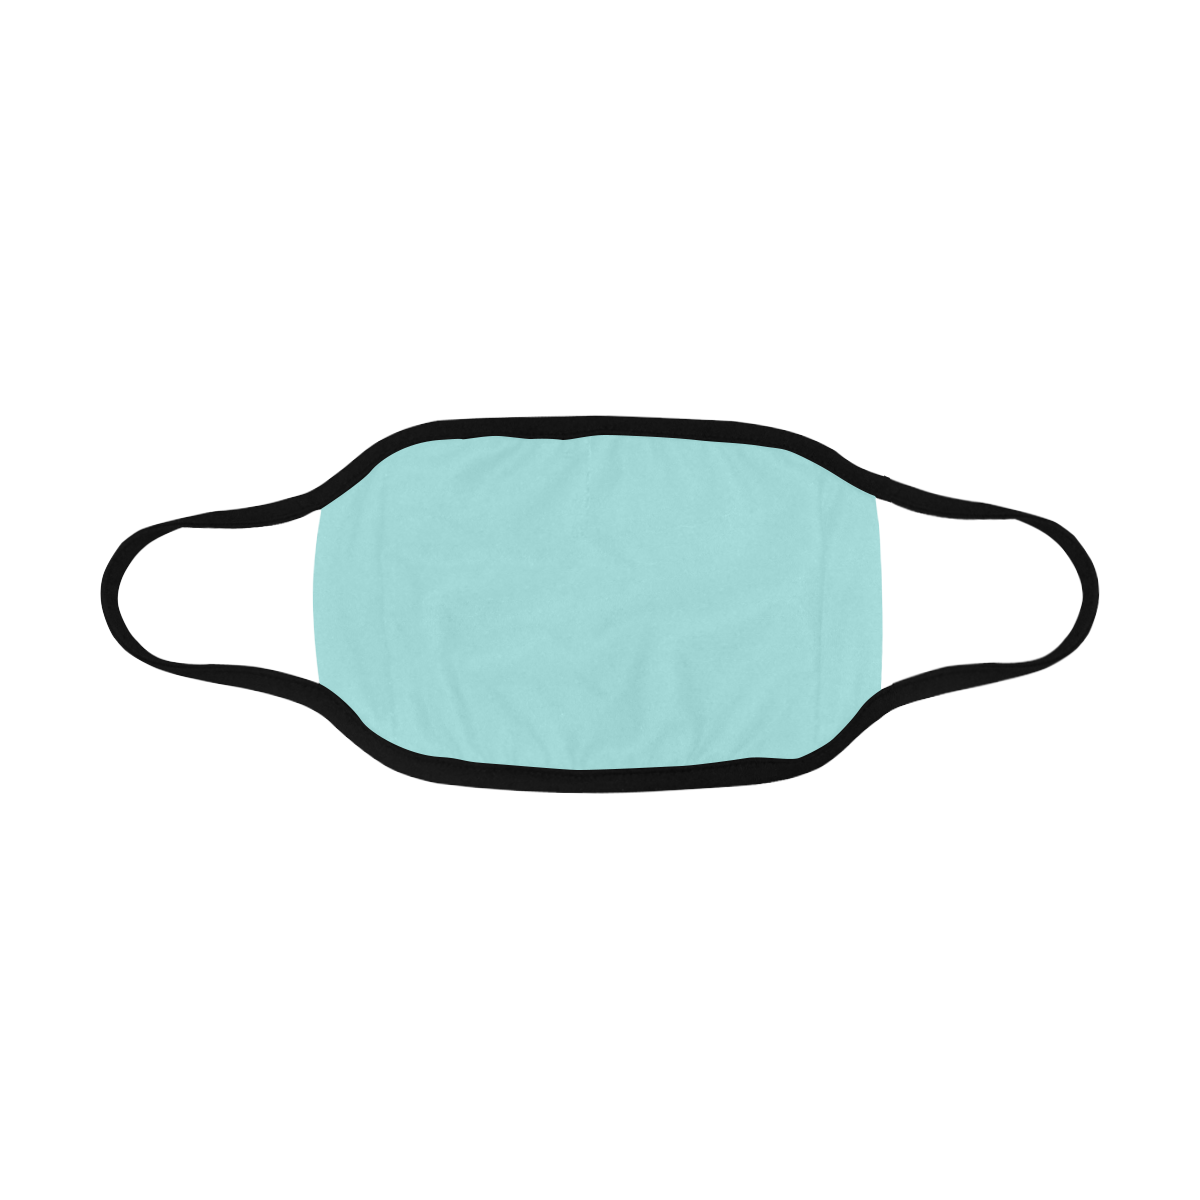 color pale turquoise Mouth Mask (30 Filters Included) (Non-medical Products)